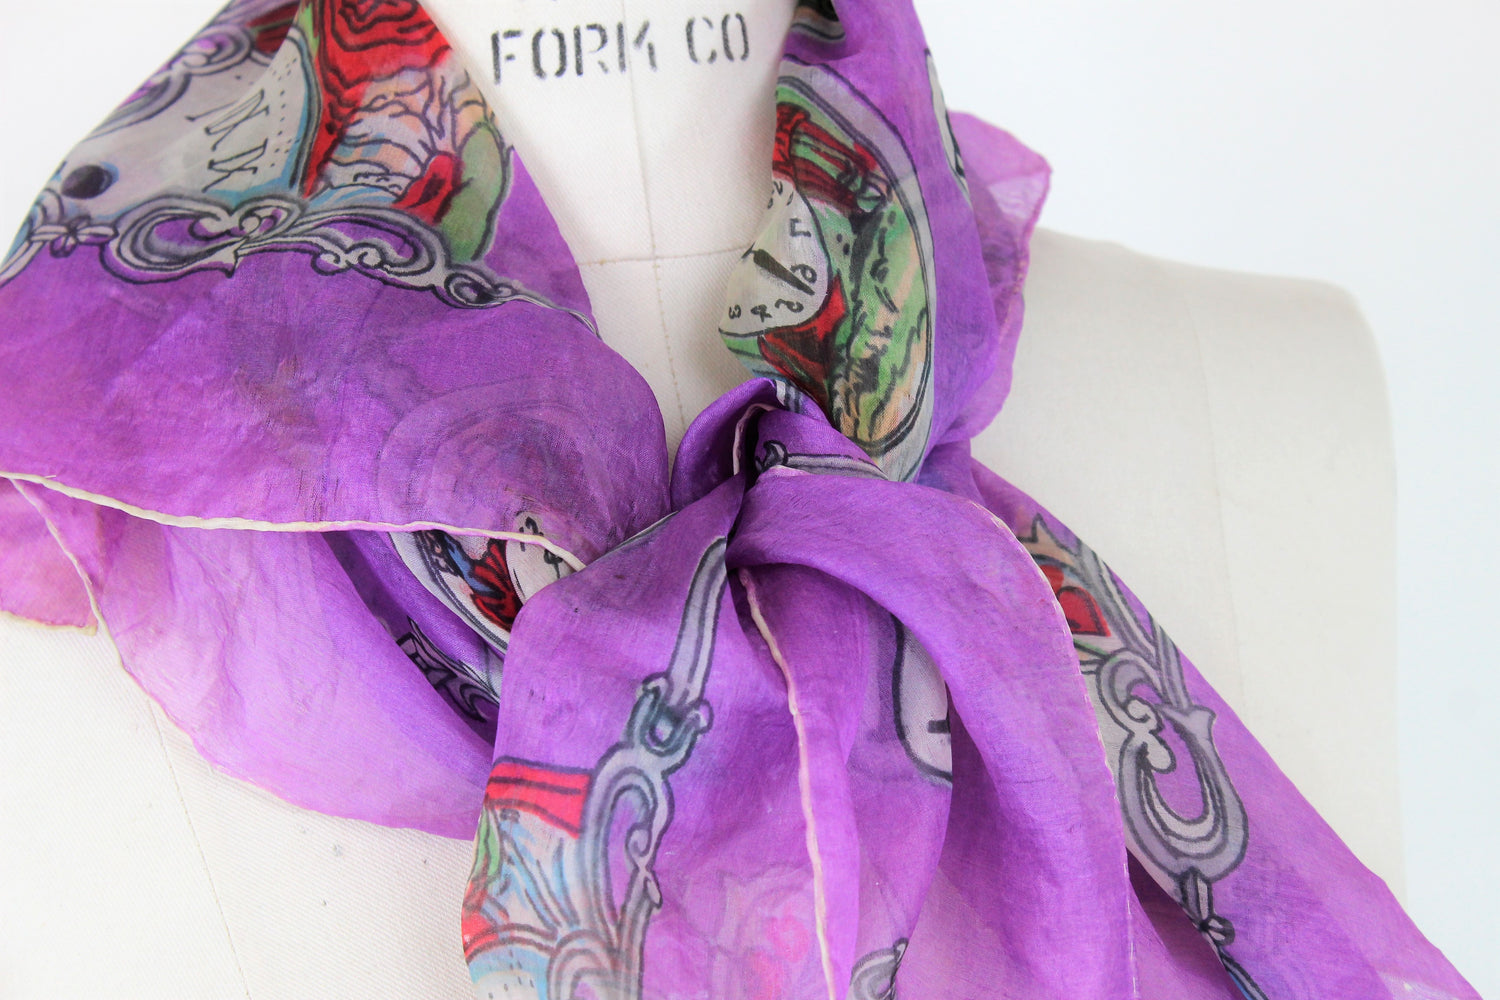 Vintage 1940s Novelty Print Collectible Scarf with Clocks 